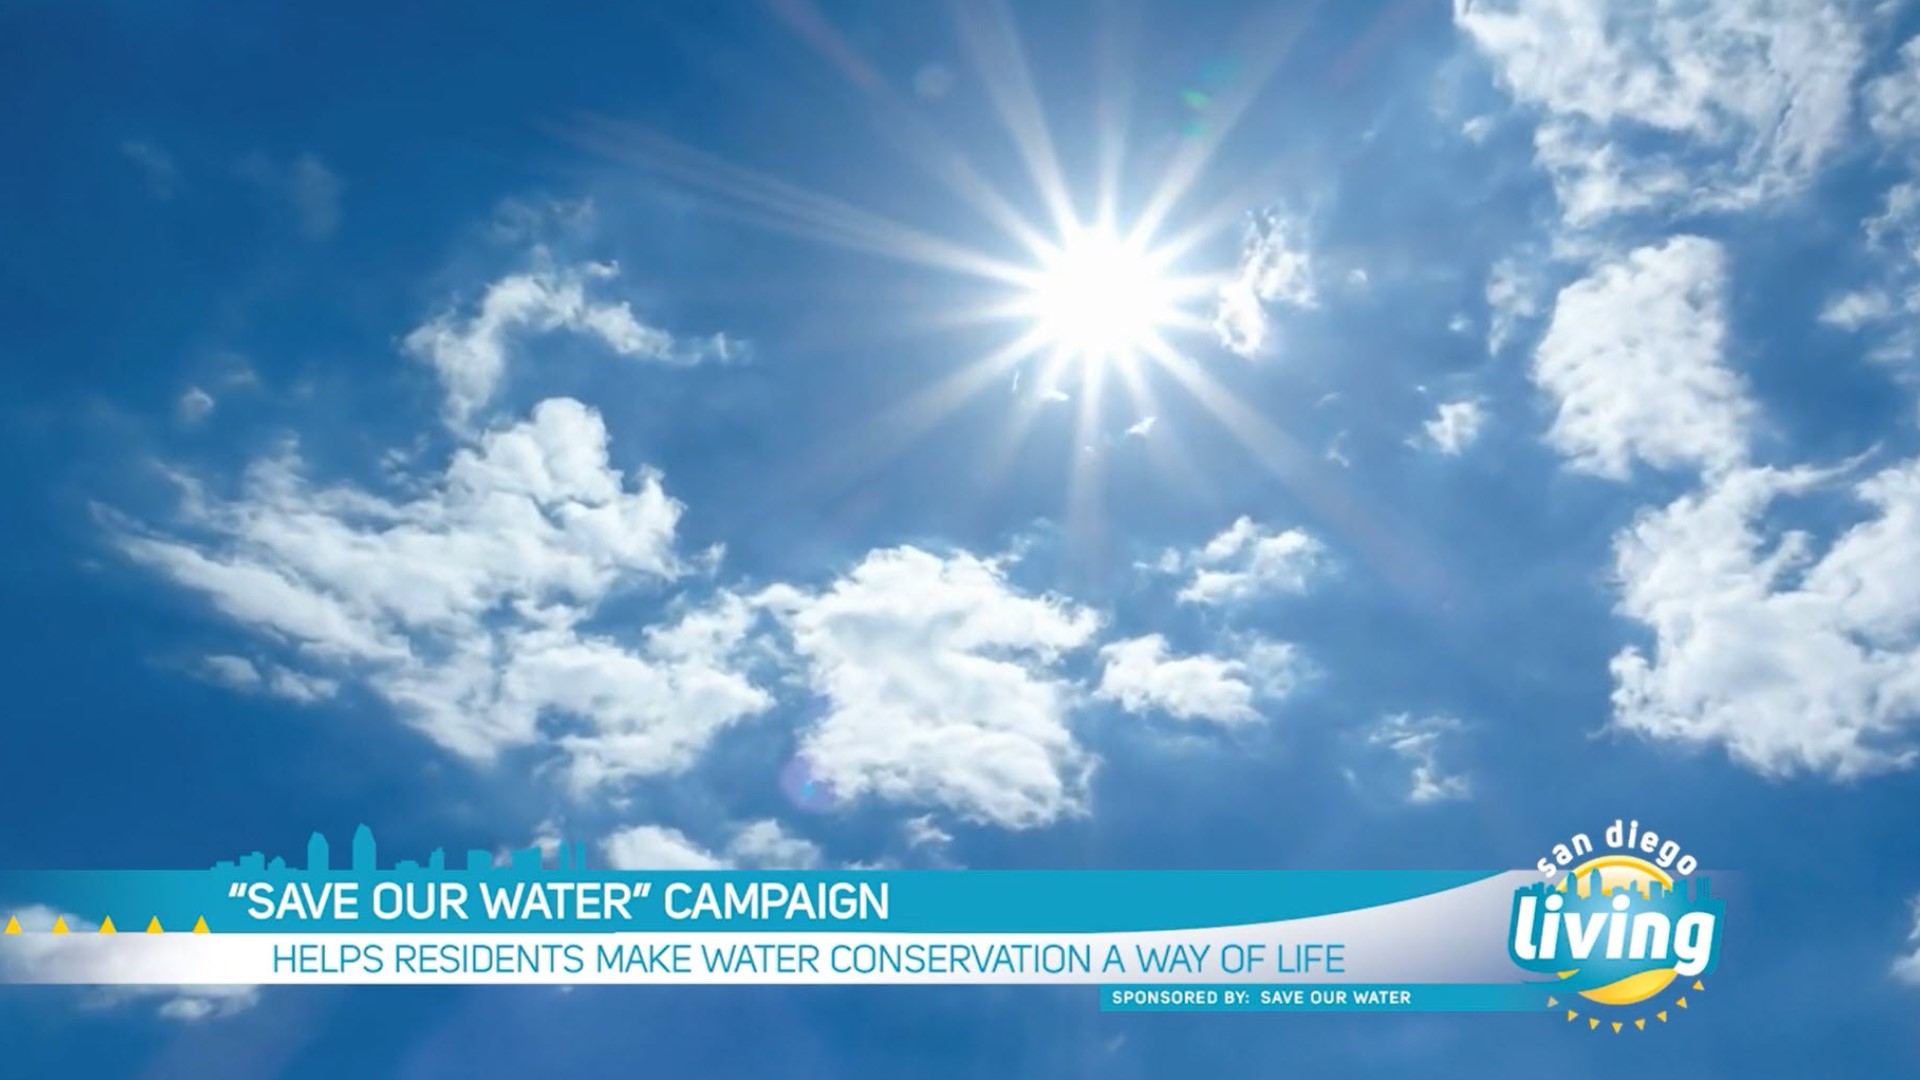 Save Water with Smart Garden Choices and California Native Plants. Sponsored by Save Our Water